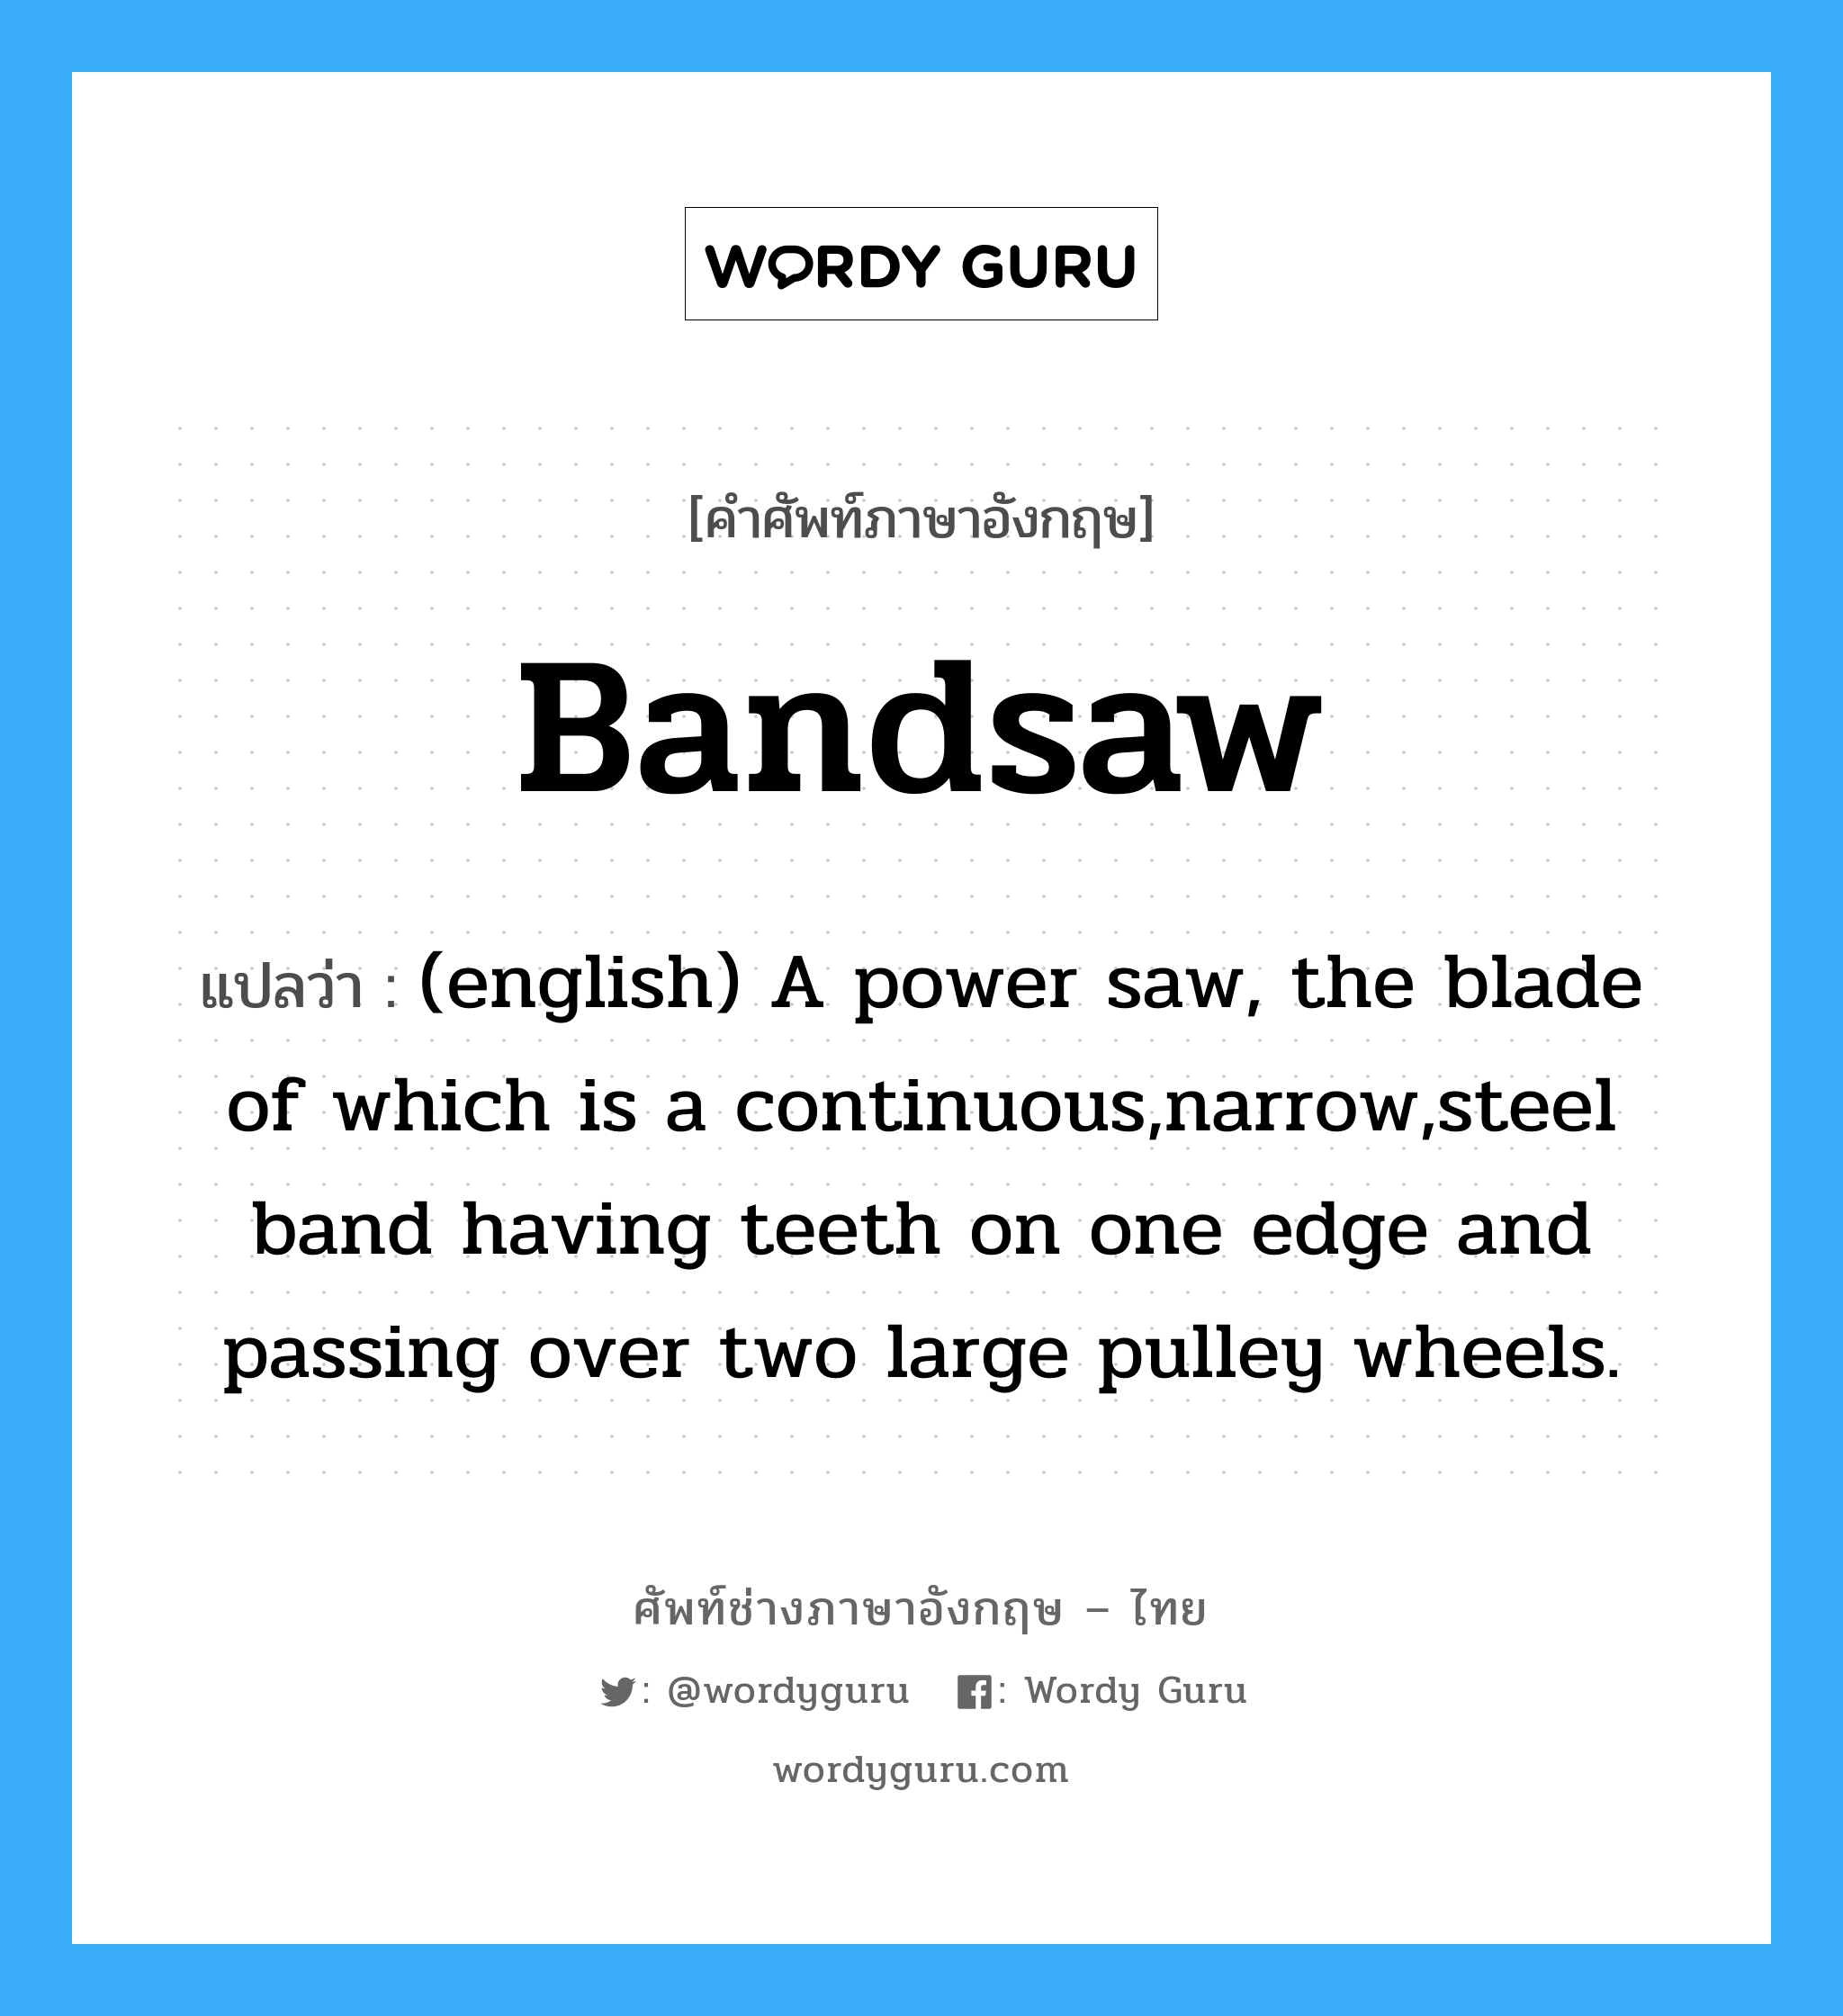 Bandsaw แปลว่า?, คำศัพท์ช่างภาษาอังกฤษ - ไทย Bandsaw คำศัพท์ภาษาอังกฤษ Bandsaw แปลว่า (english) A power saw, the blade of which is a continuous,narrow,steel band having teeth on one edge and passing over two large pulley wheels.